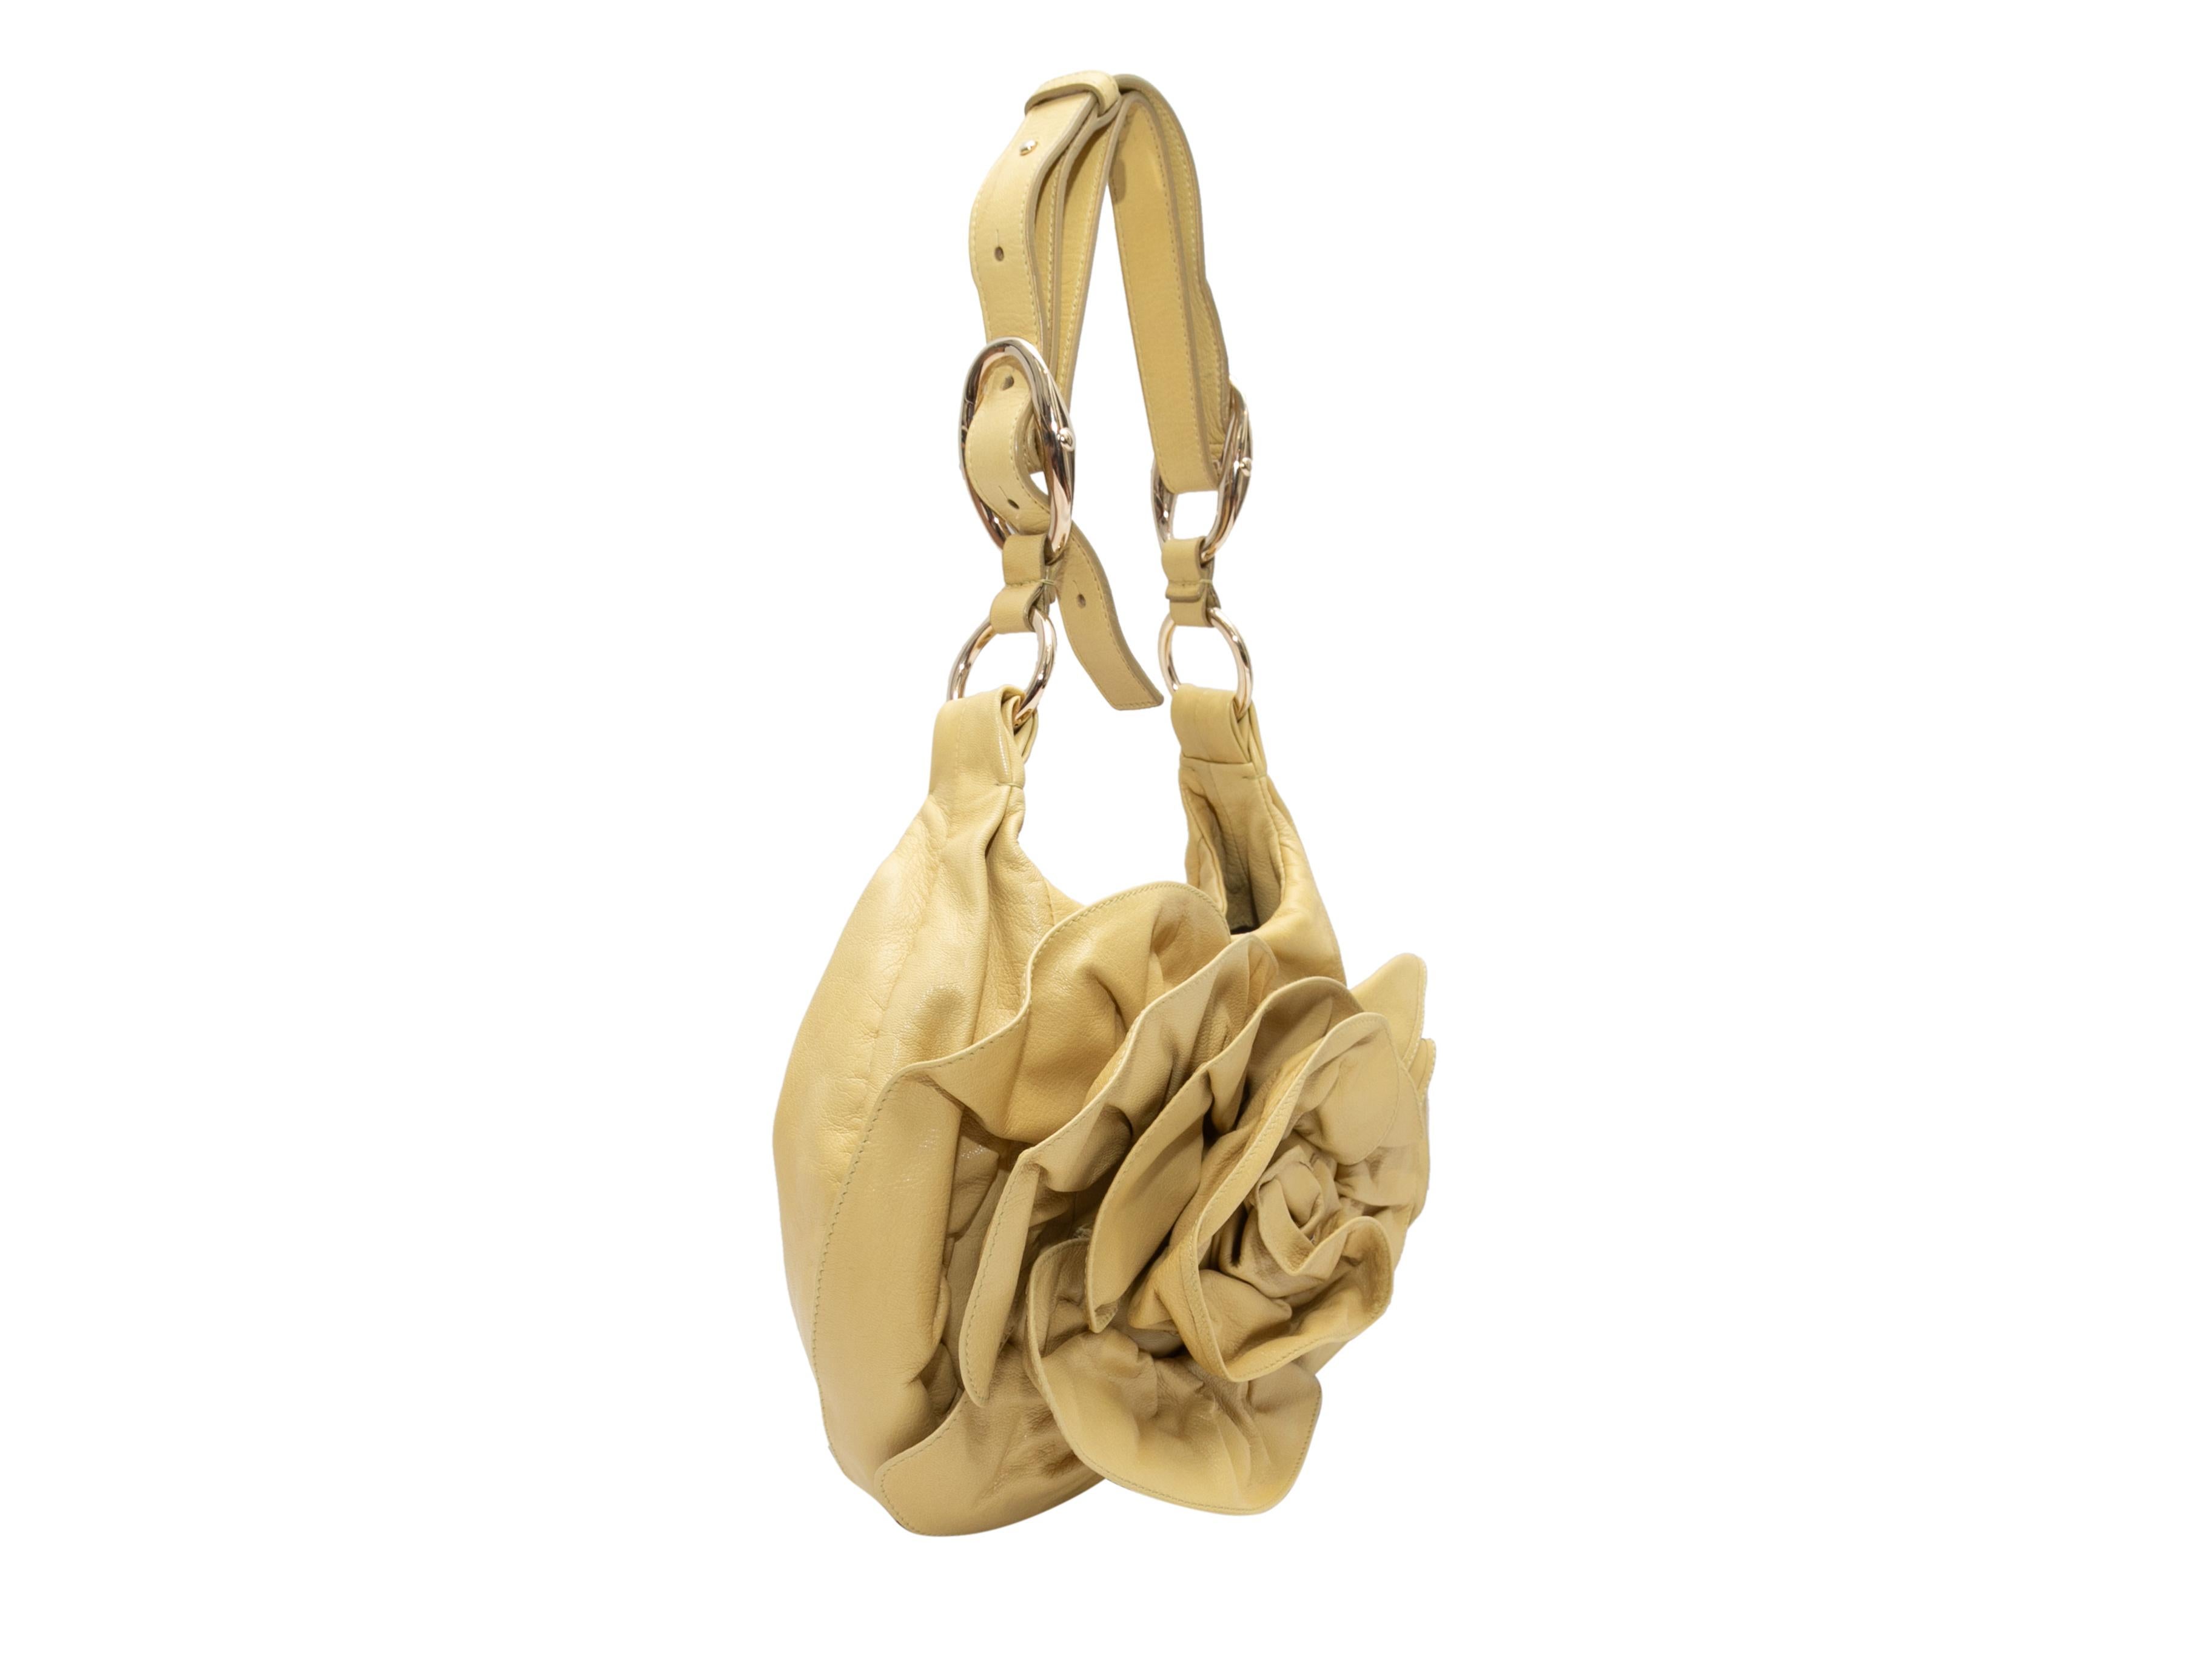 Vintage Chartreuse Yves Saint Laurent Nadja Floral Shoulder Bag. Circa 2003. The Nadja Floral Shoulder Bag features a leather body, gold-tone hardware, a single shoulder strap, and a top closure. 13